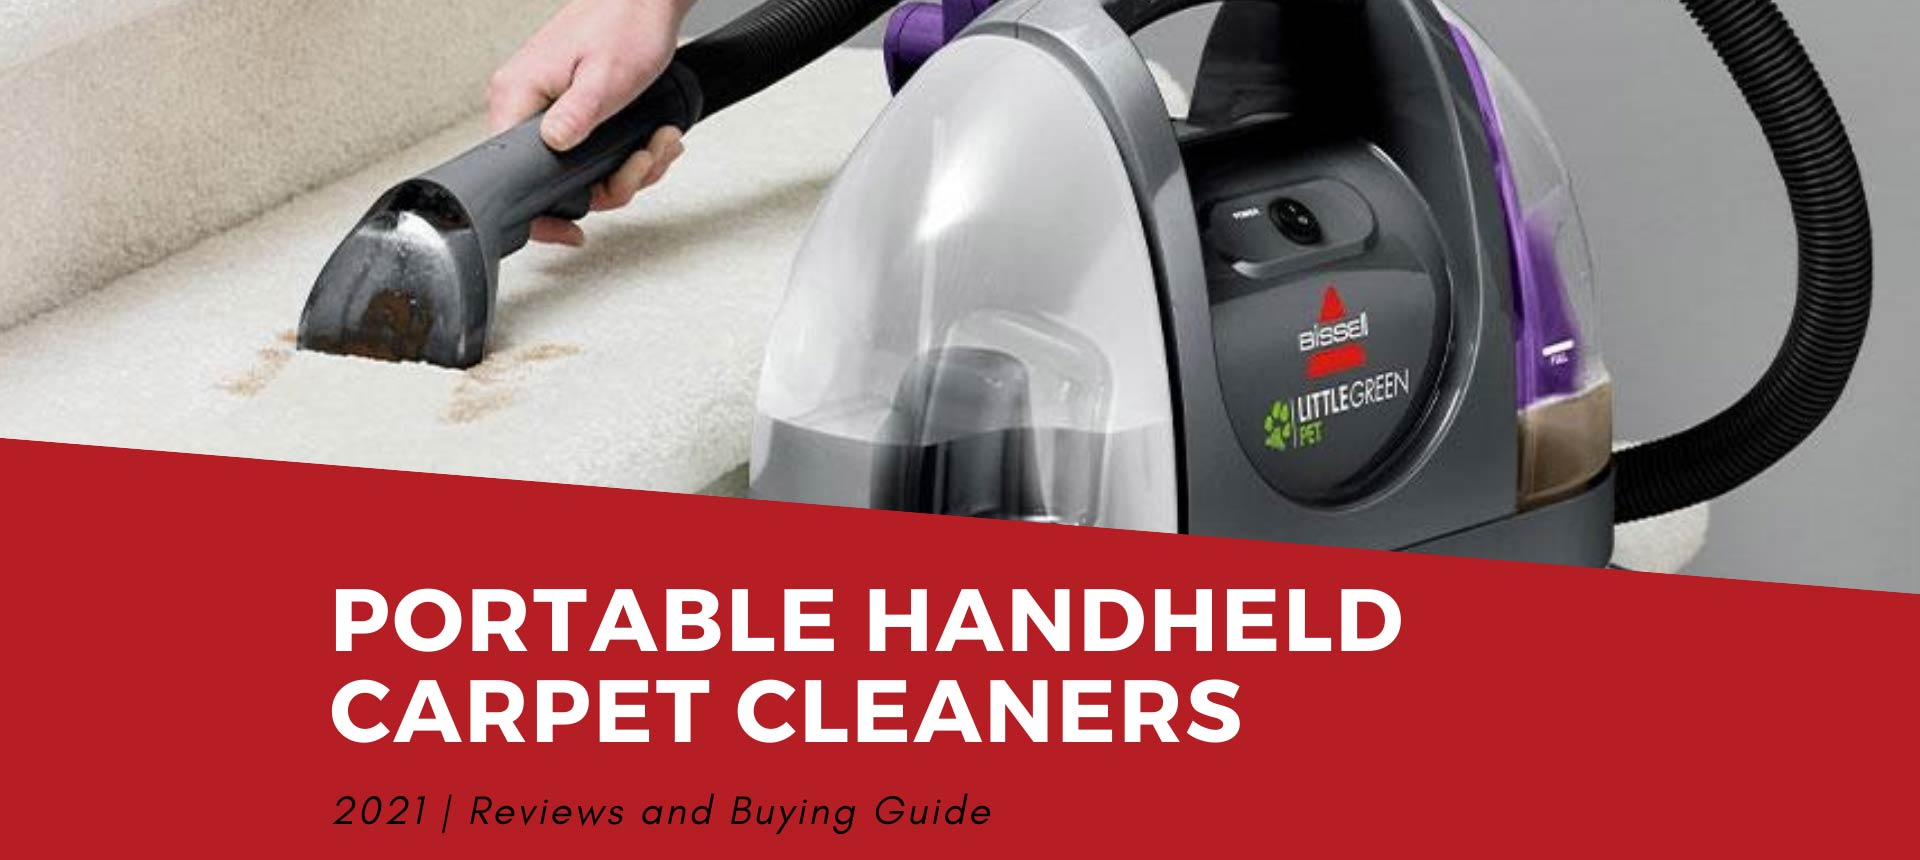 Best Portable Handheld Carpet Cleaners Reviews 2021